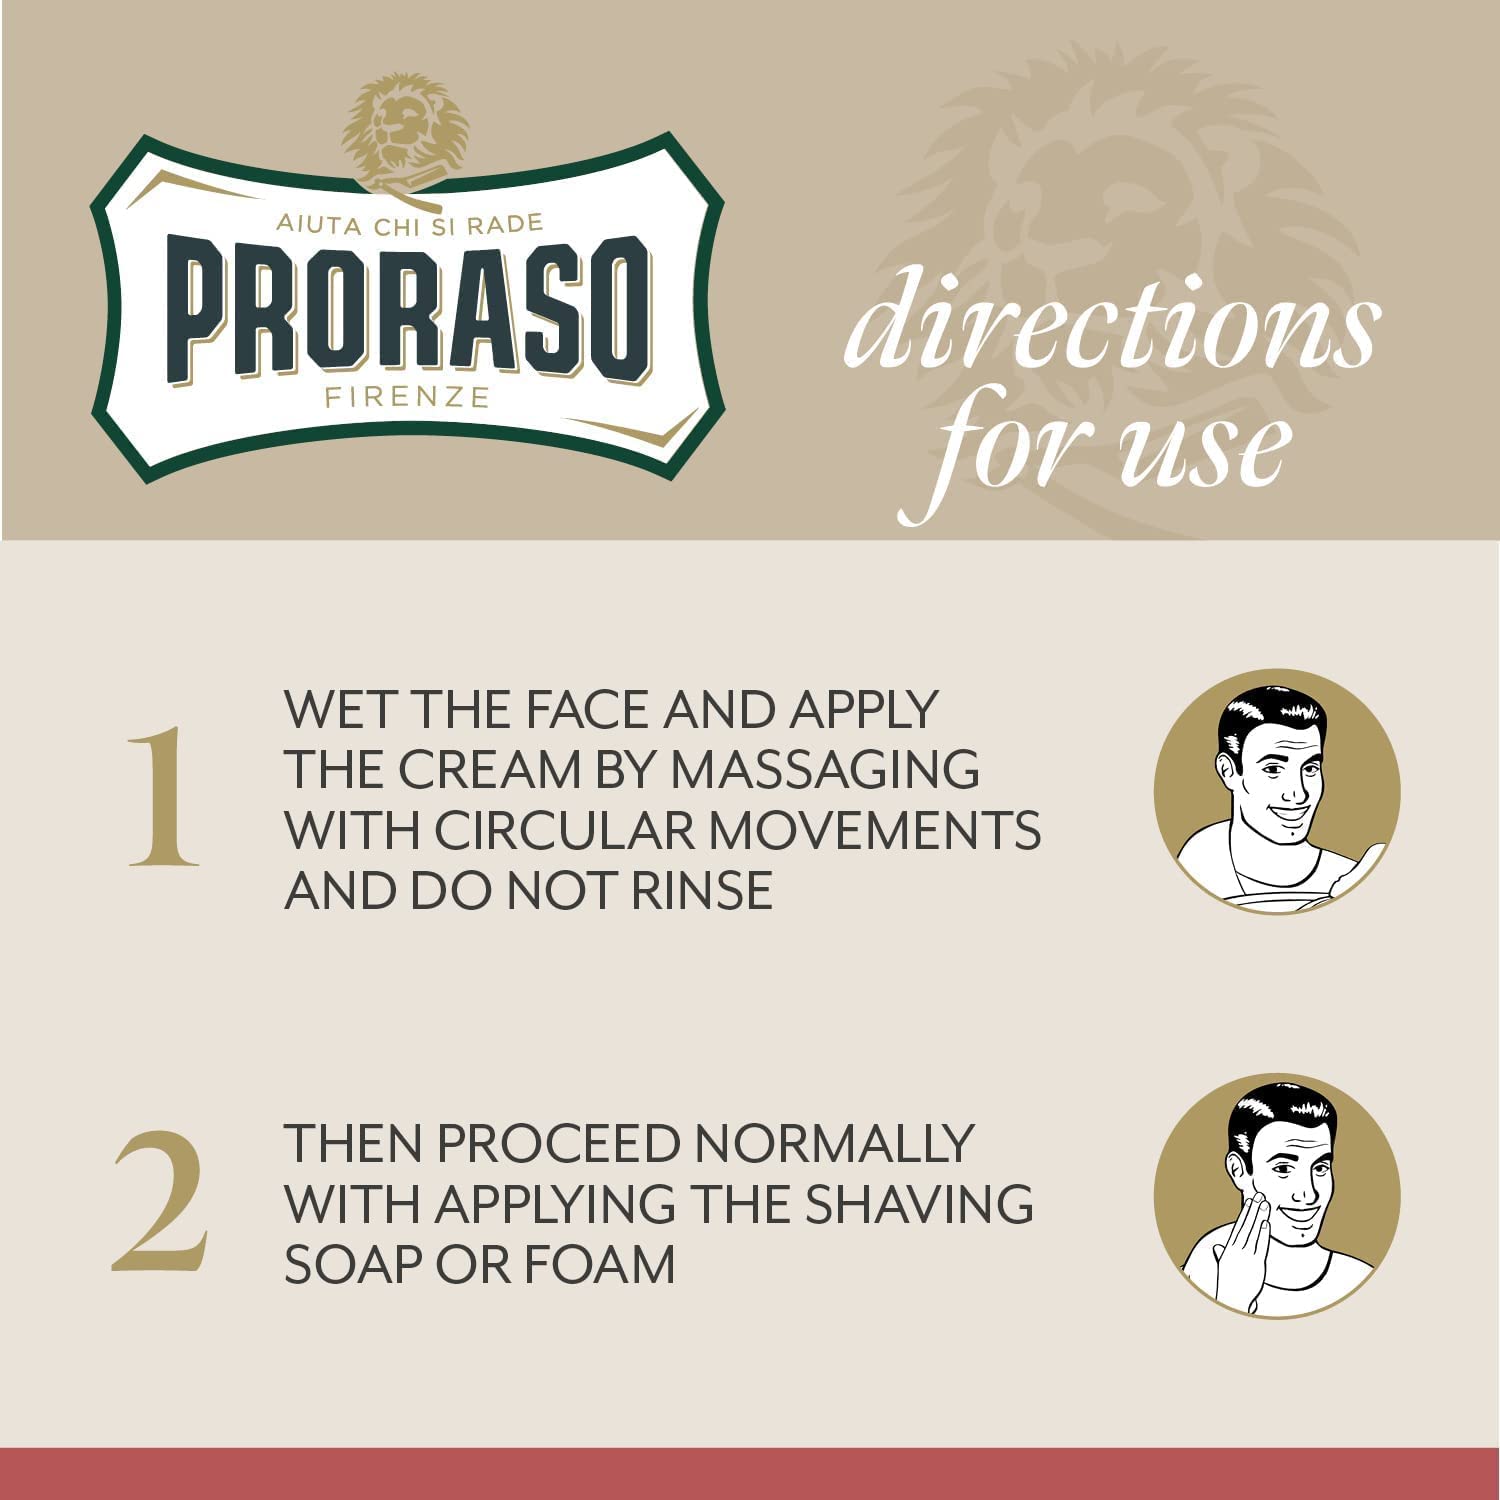 Proraso Pre-Shave Conditioning Cream for Men, Moisturizing and Nourishing for Coarse Beards with Sandalwood Oil, 3.6 oz